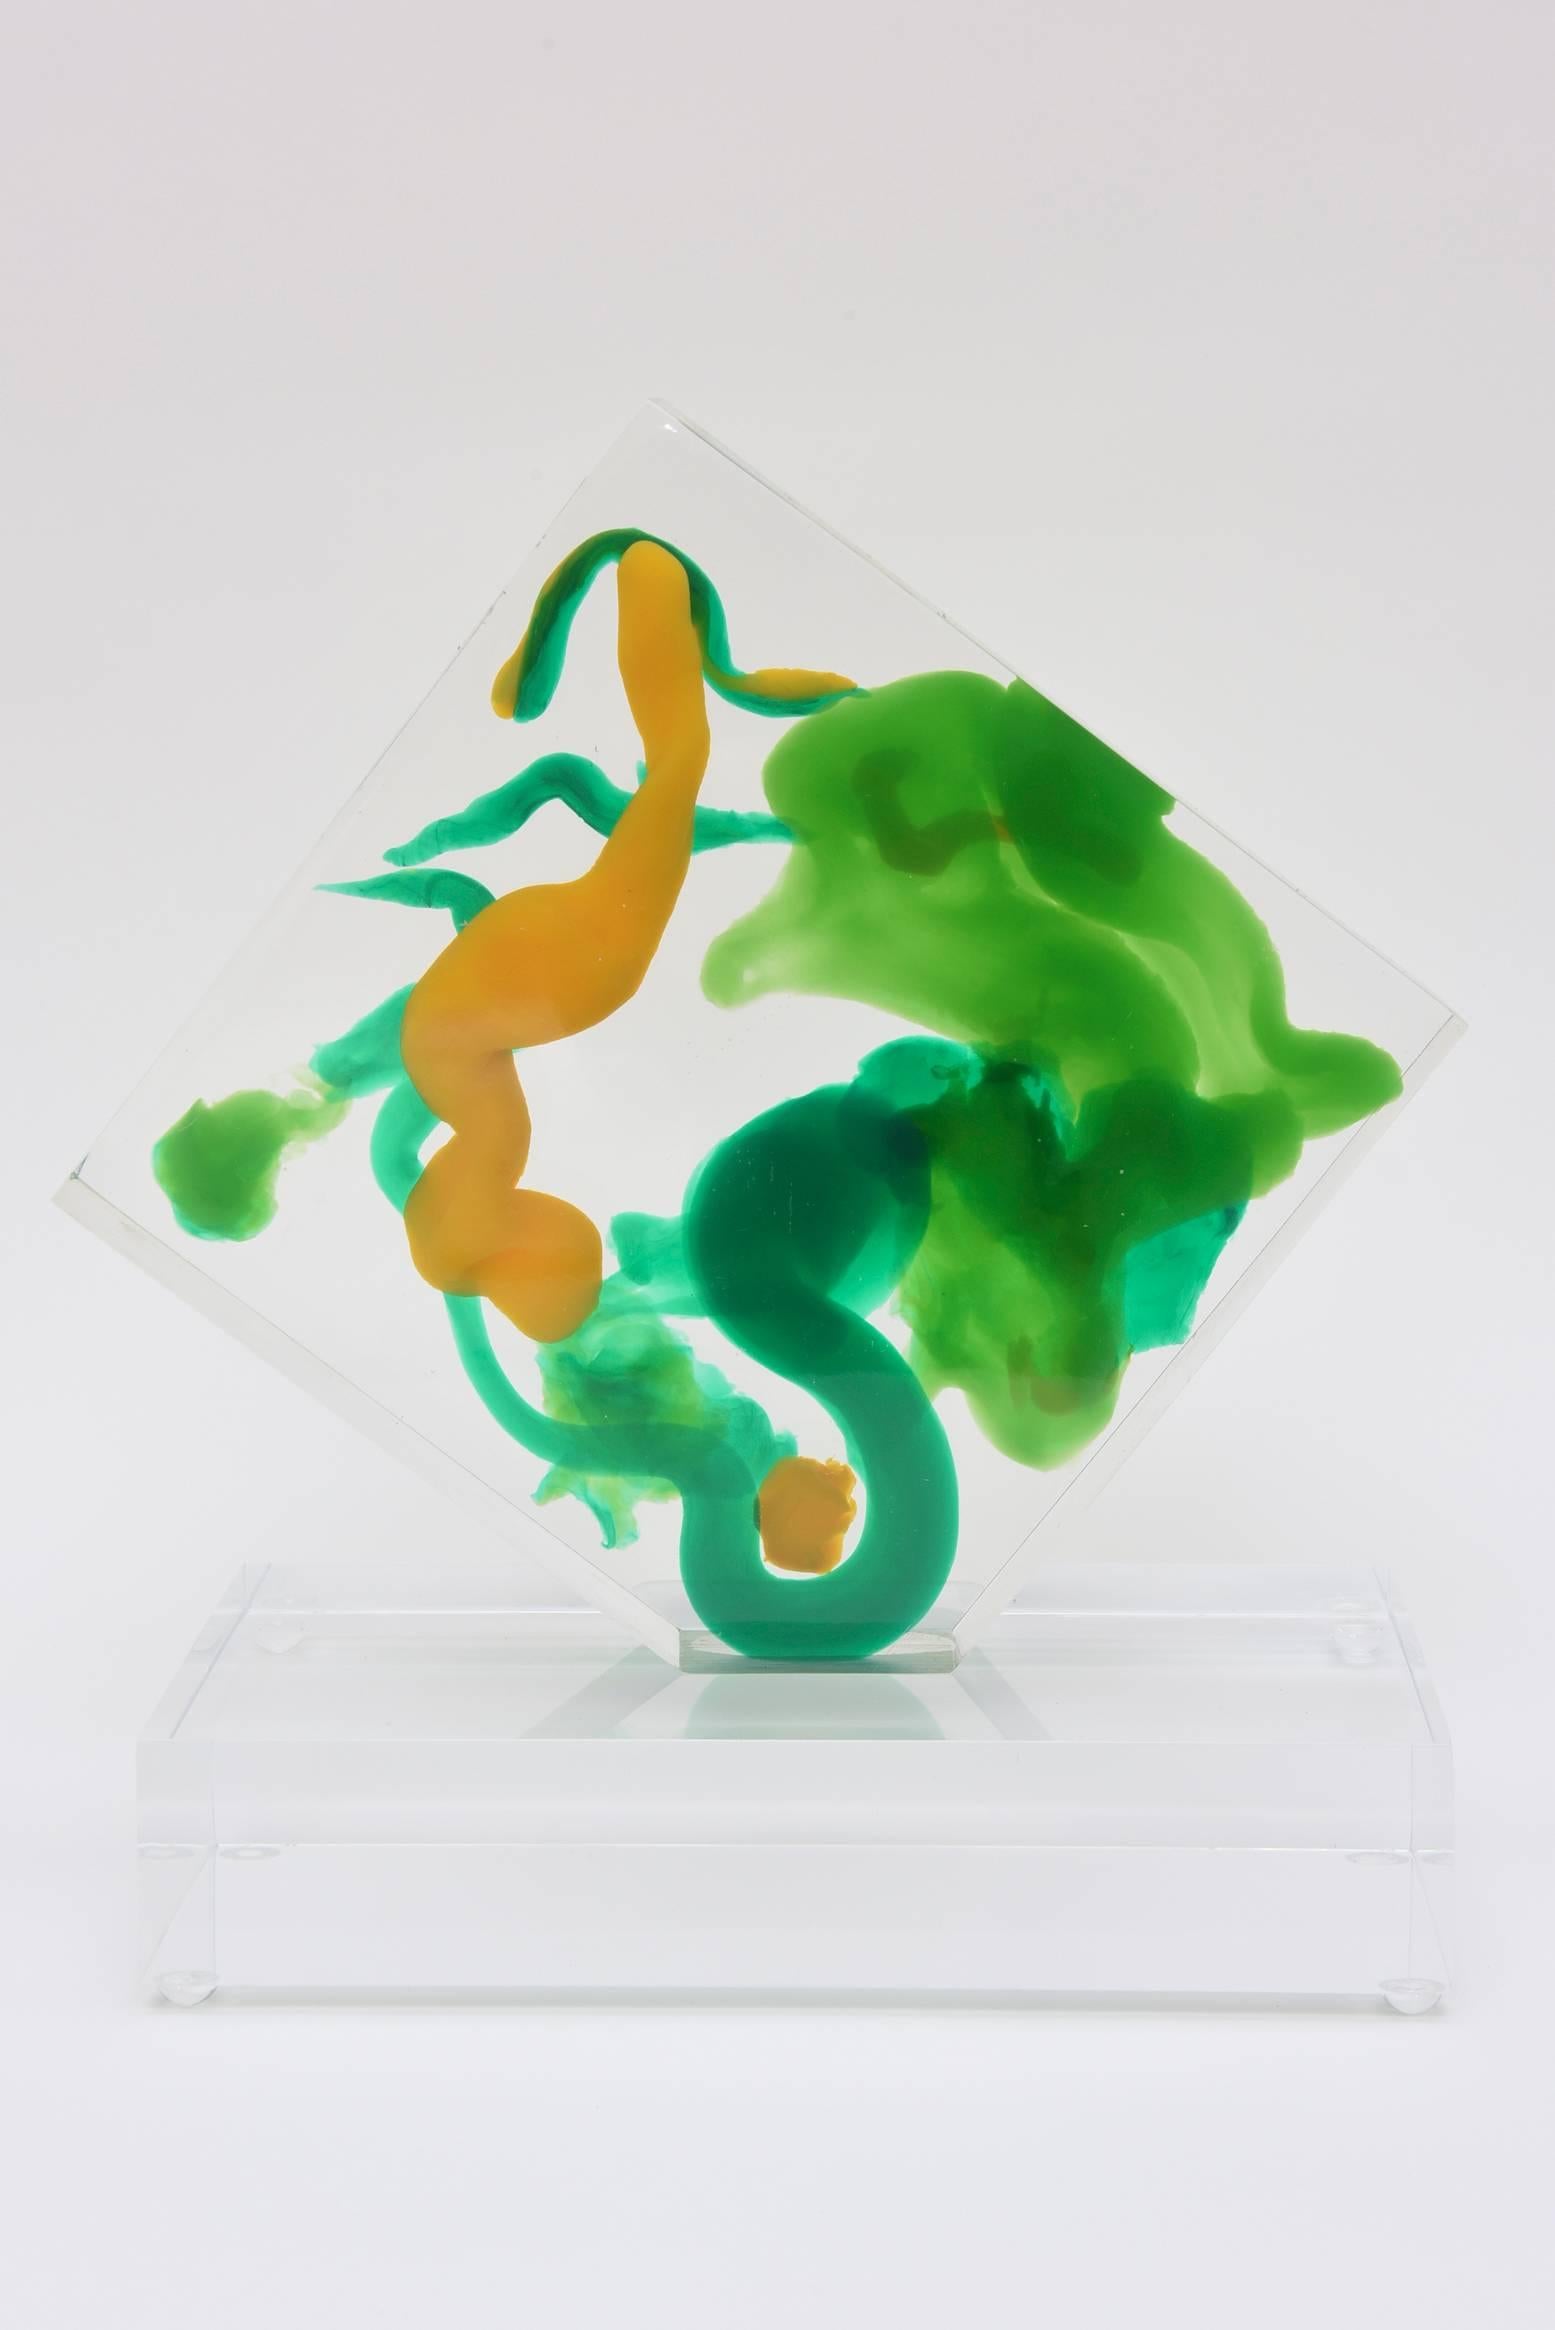 Abstractions of floating emerald shades of greens and tans become abstract blobs in this embedded fluid Lucite sculpture. It is if a painting is inside of the Lucite. The abstract colored designs seem to float in the inside space of the clear